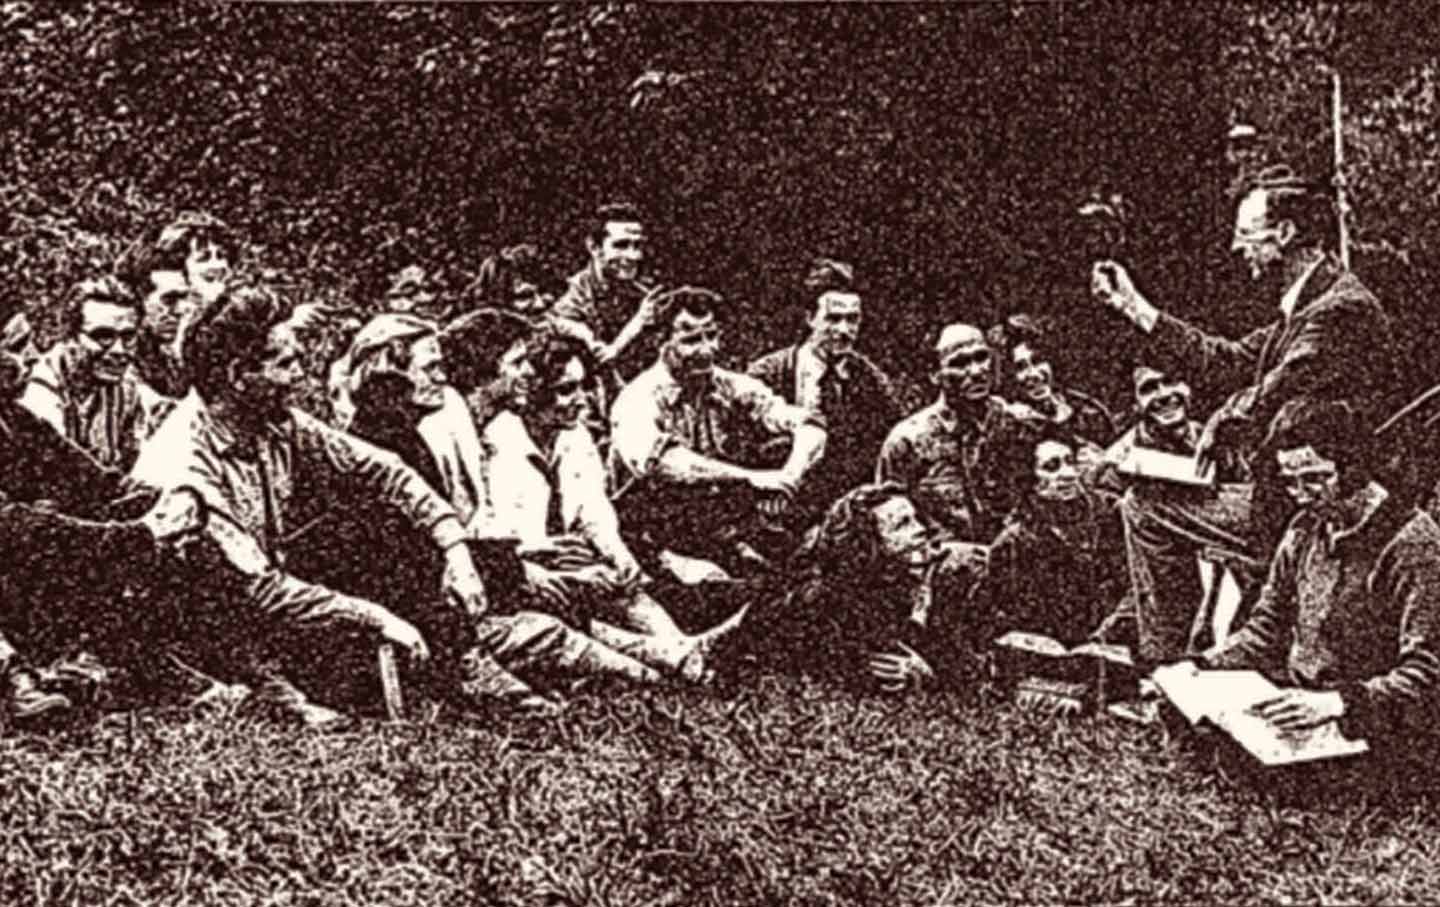 A.J. Muste (left, seated) leading a class at Brookwood in 1925.